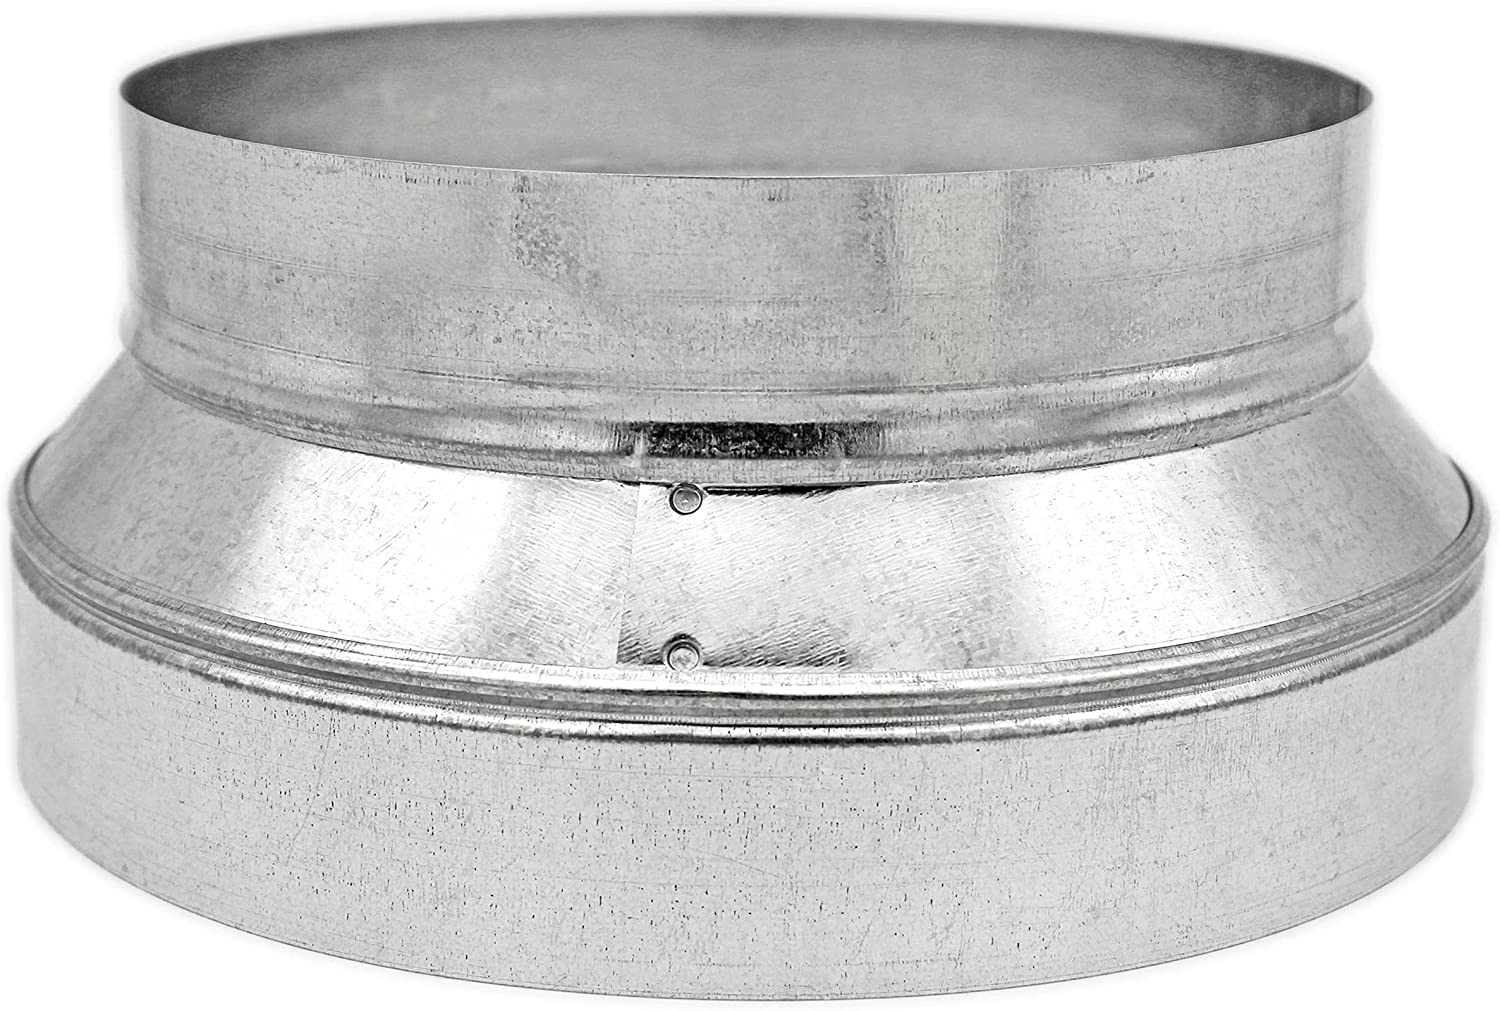 HVAC Premium Round Metal Pipe Reducer & Increaser | 16" to 12" HVAC Duct Reducer or Increaser 26g Gauge | Galvanized Sheet Metal Ducting Connector is Compatible with Duct 12"